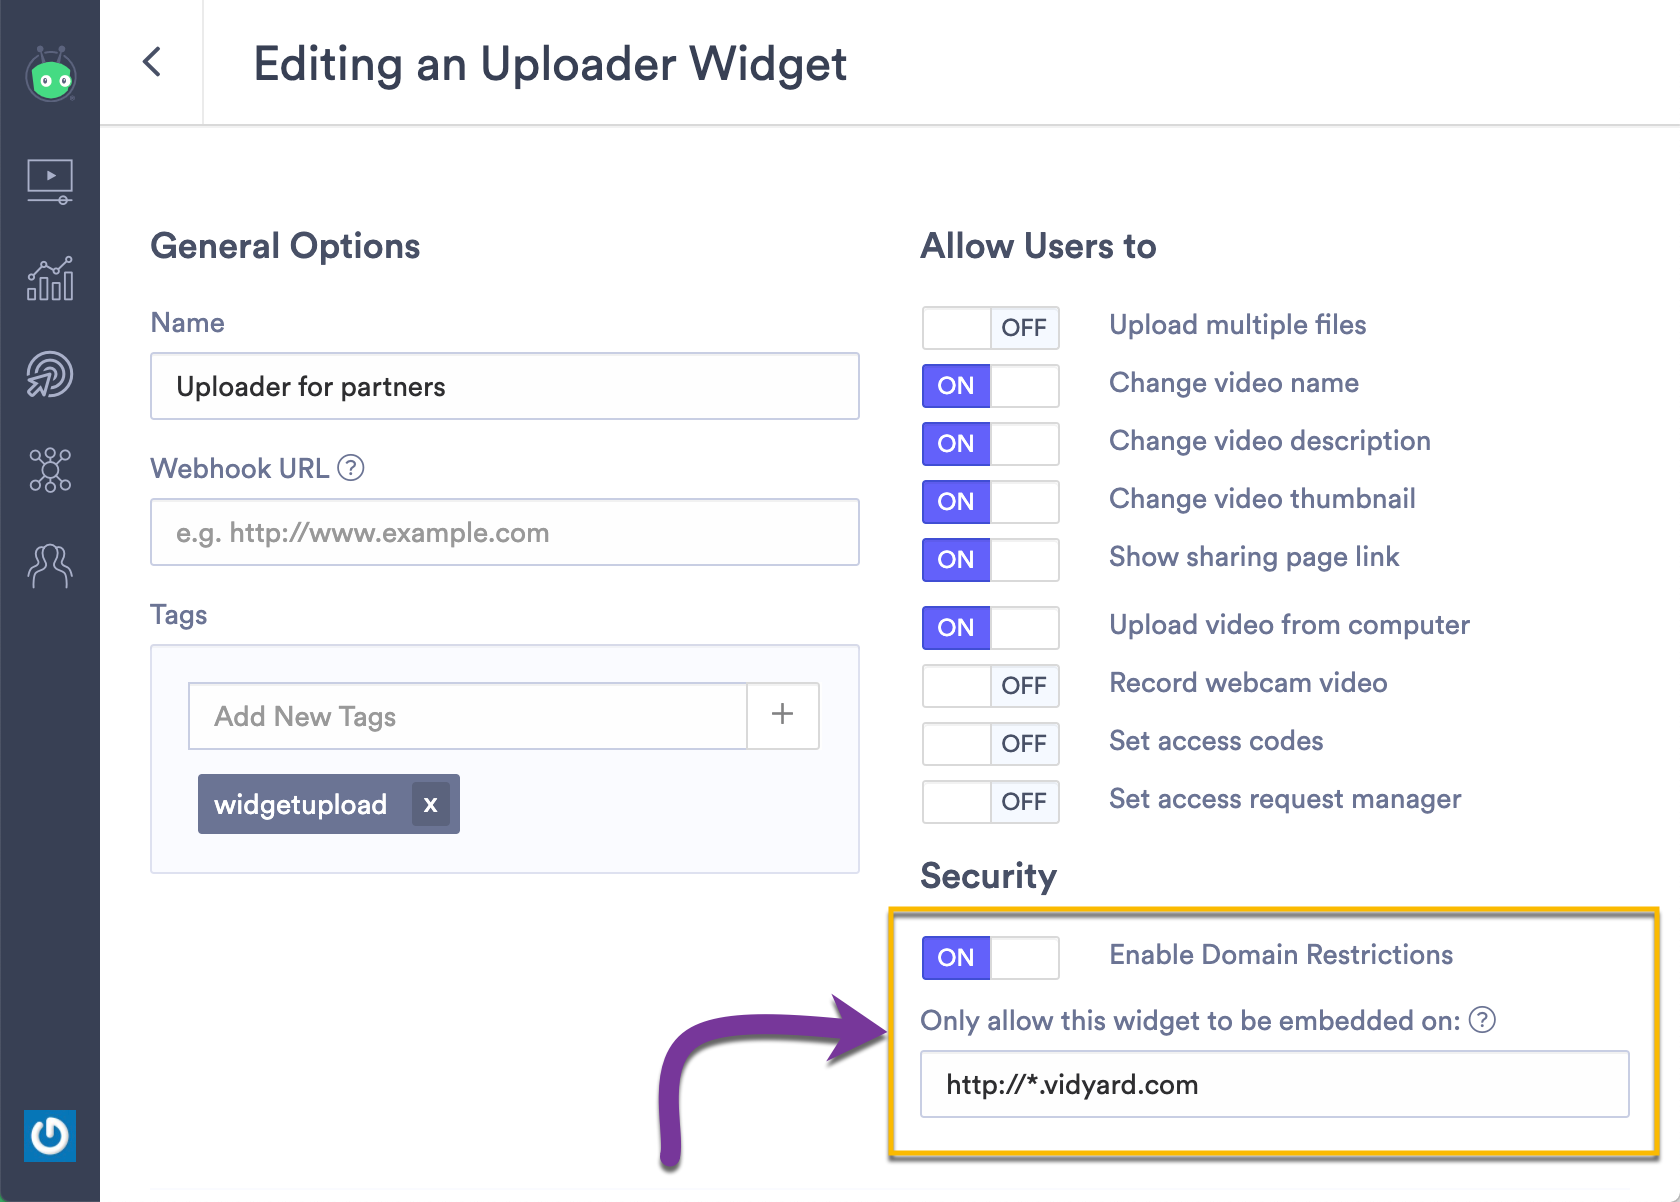 Restricting where you uploader widget can be embedded to a specific web domain